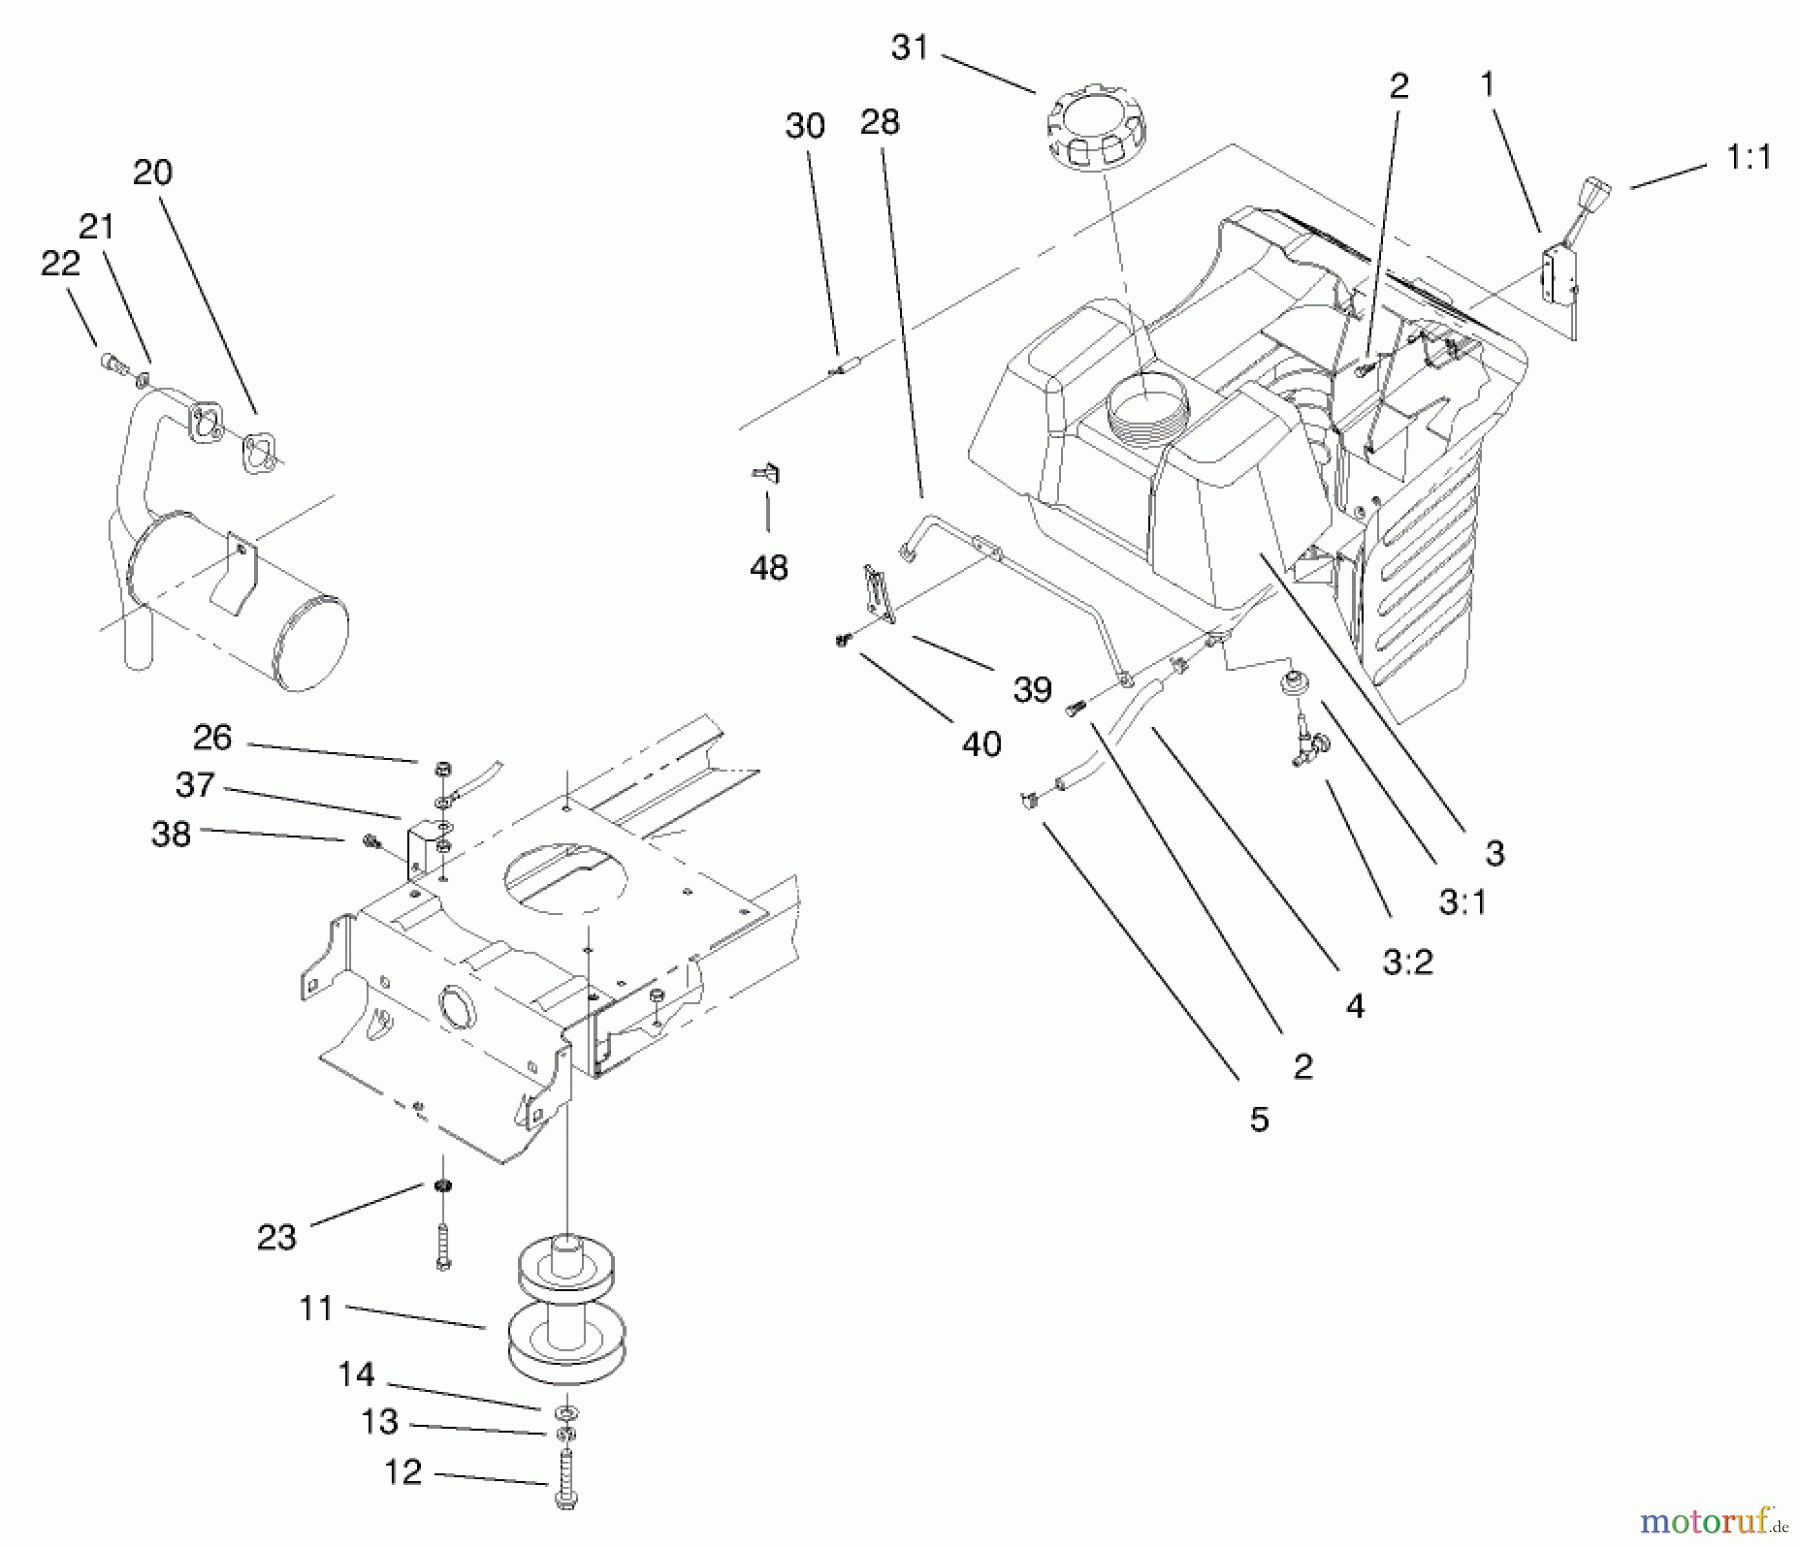  Toro Neu Mowers, Lawn & Garden Tractor Seite 1 71209 (13-32XLE) - Toro 13-32XLE Lawn Tractor, 2000 (200000001-200999999) ENGINE SYSTEMS COMPONENTS ASSEMBLY